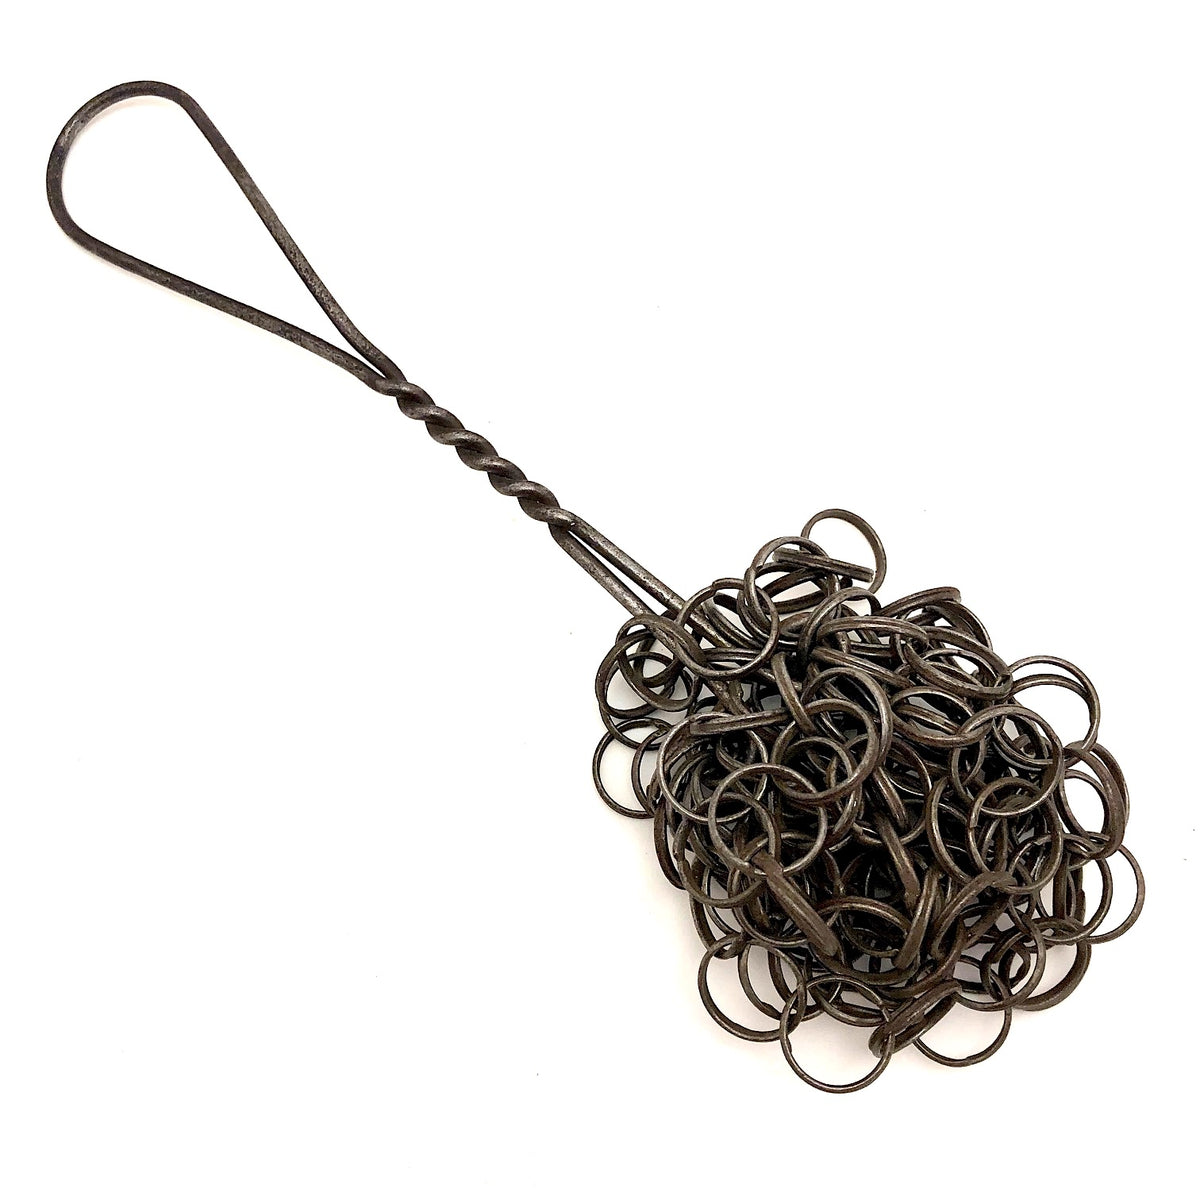 Linked Loops Antique Metal Pot Scrubber – critical EYE Finds